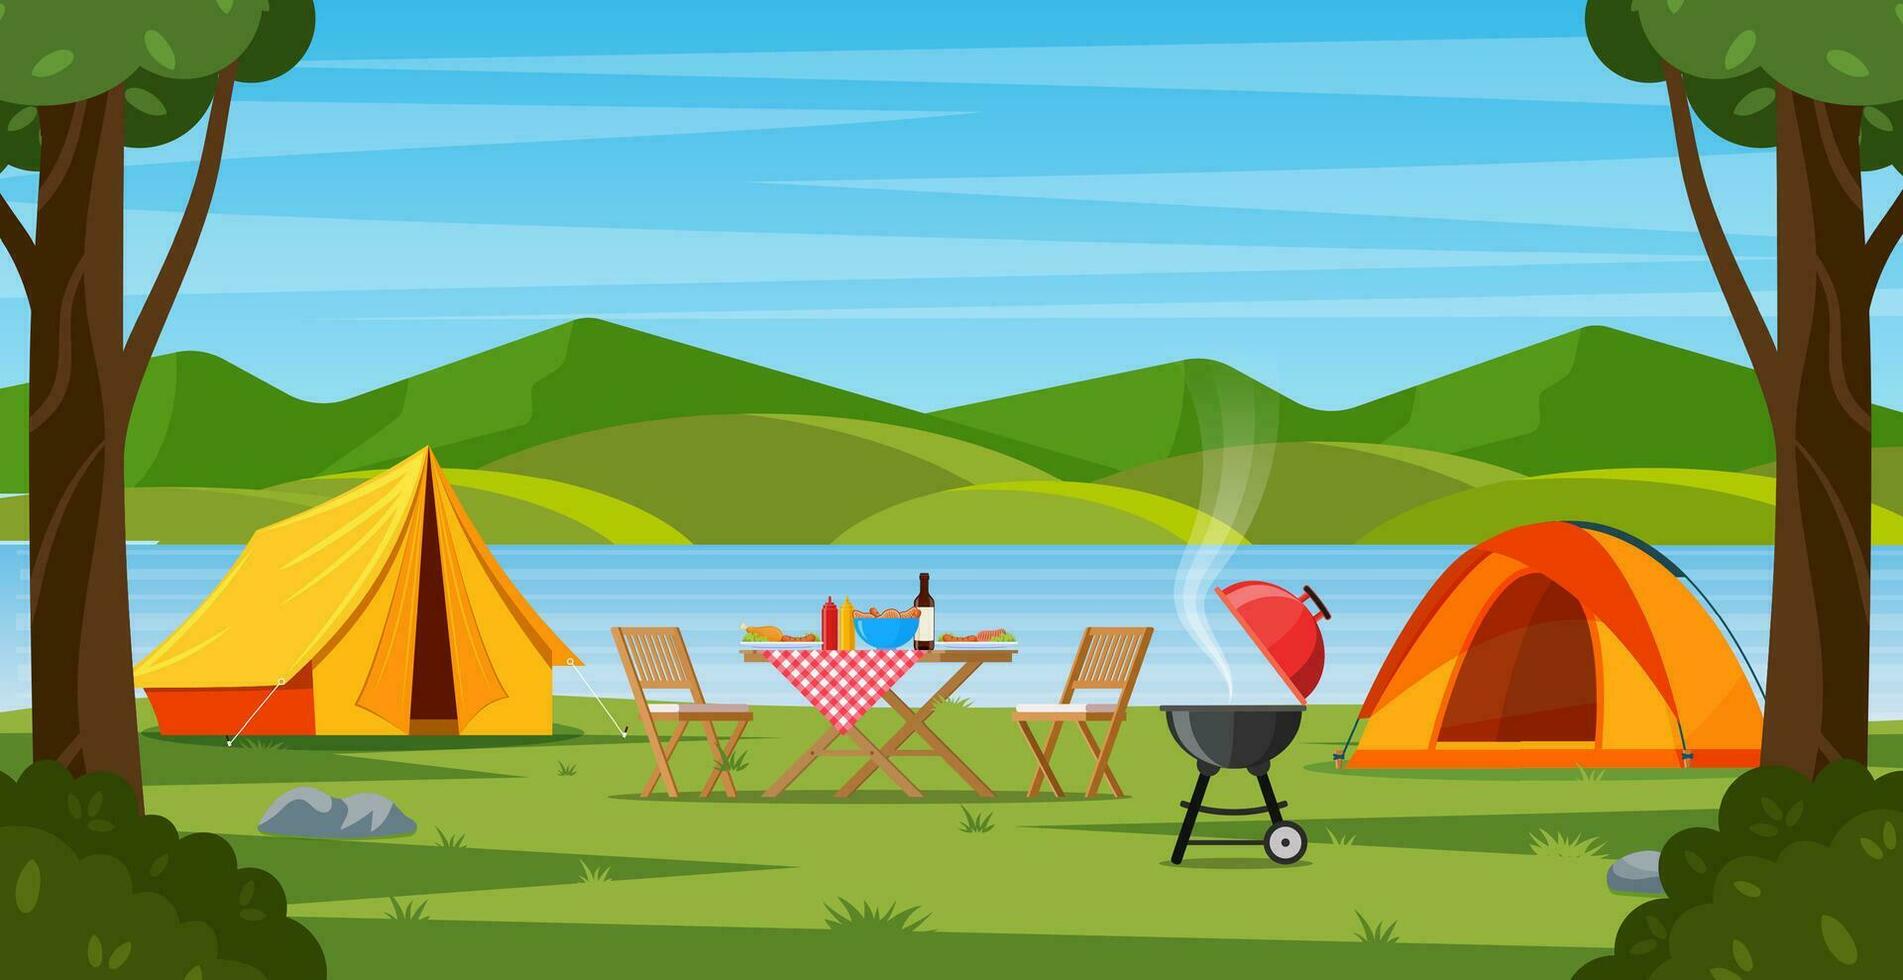 Camping tent near the lake and mountains. Summer or spring landscape. Cartoon tourist camp with picnic spot and tent among forest, mountain landscape. Vector illustration in flat style